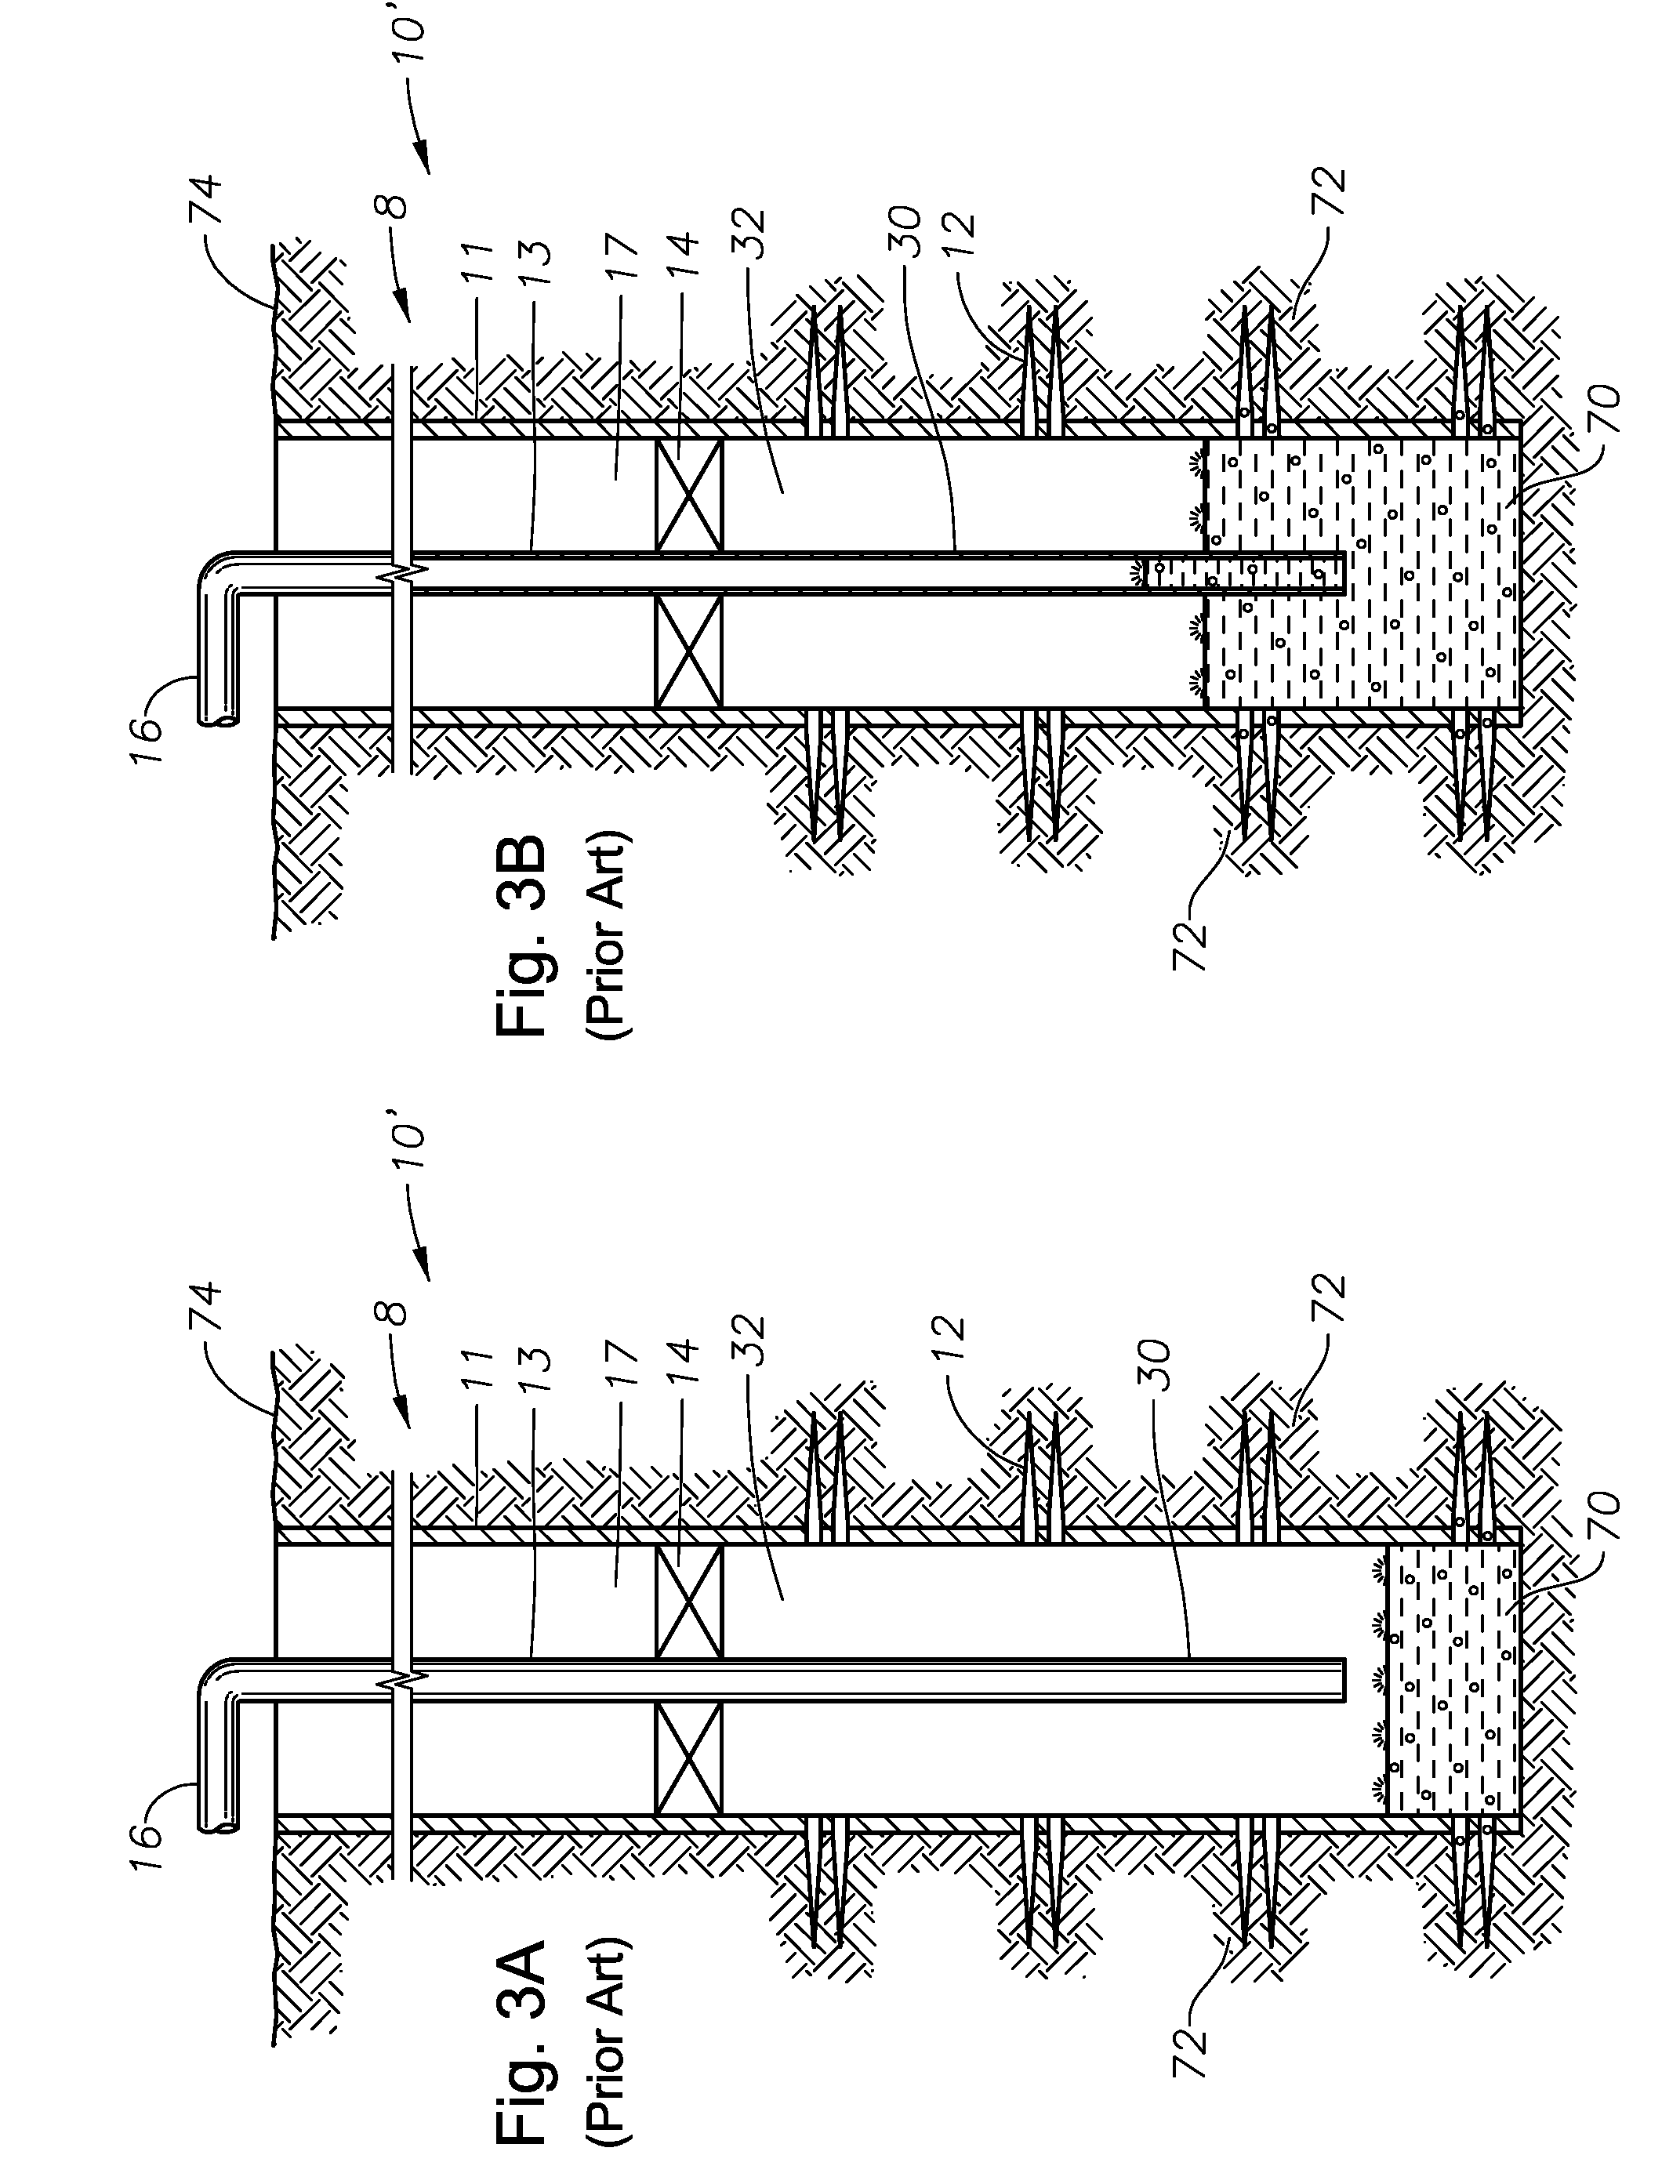 Gas well de-watering apparatus and method